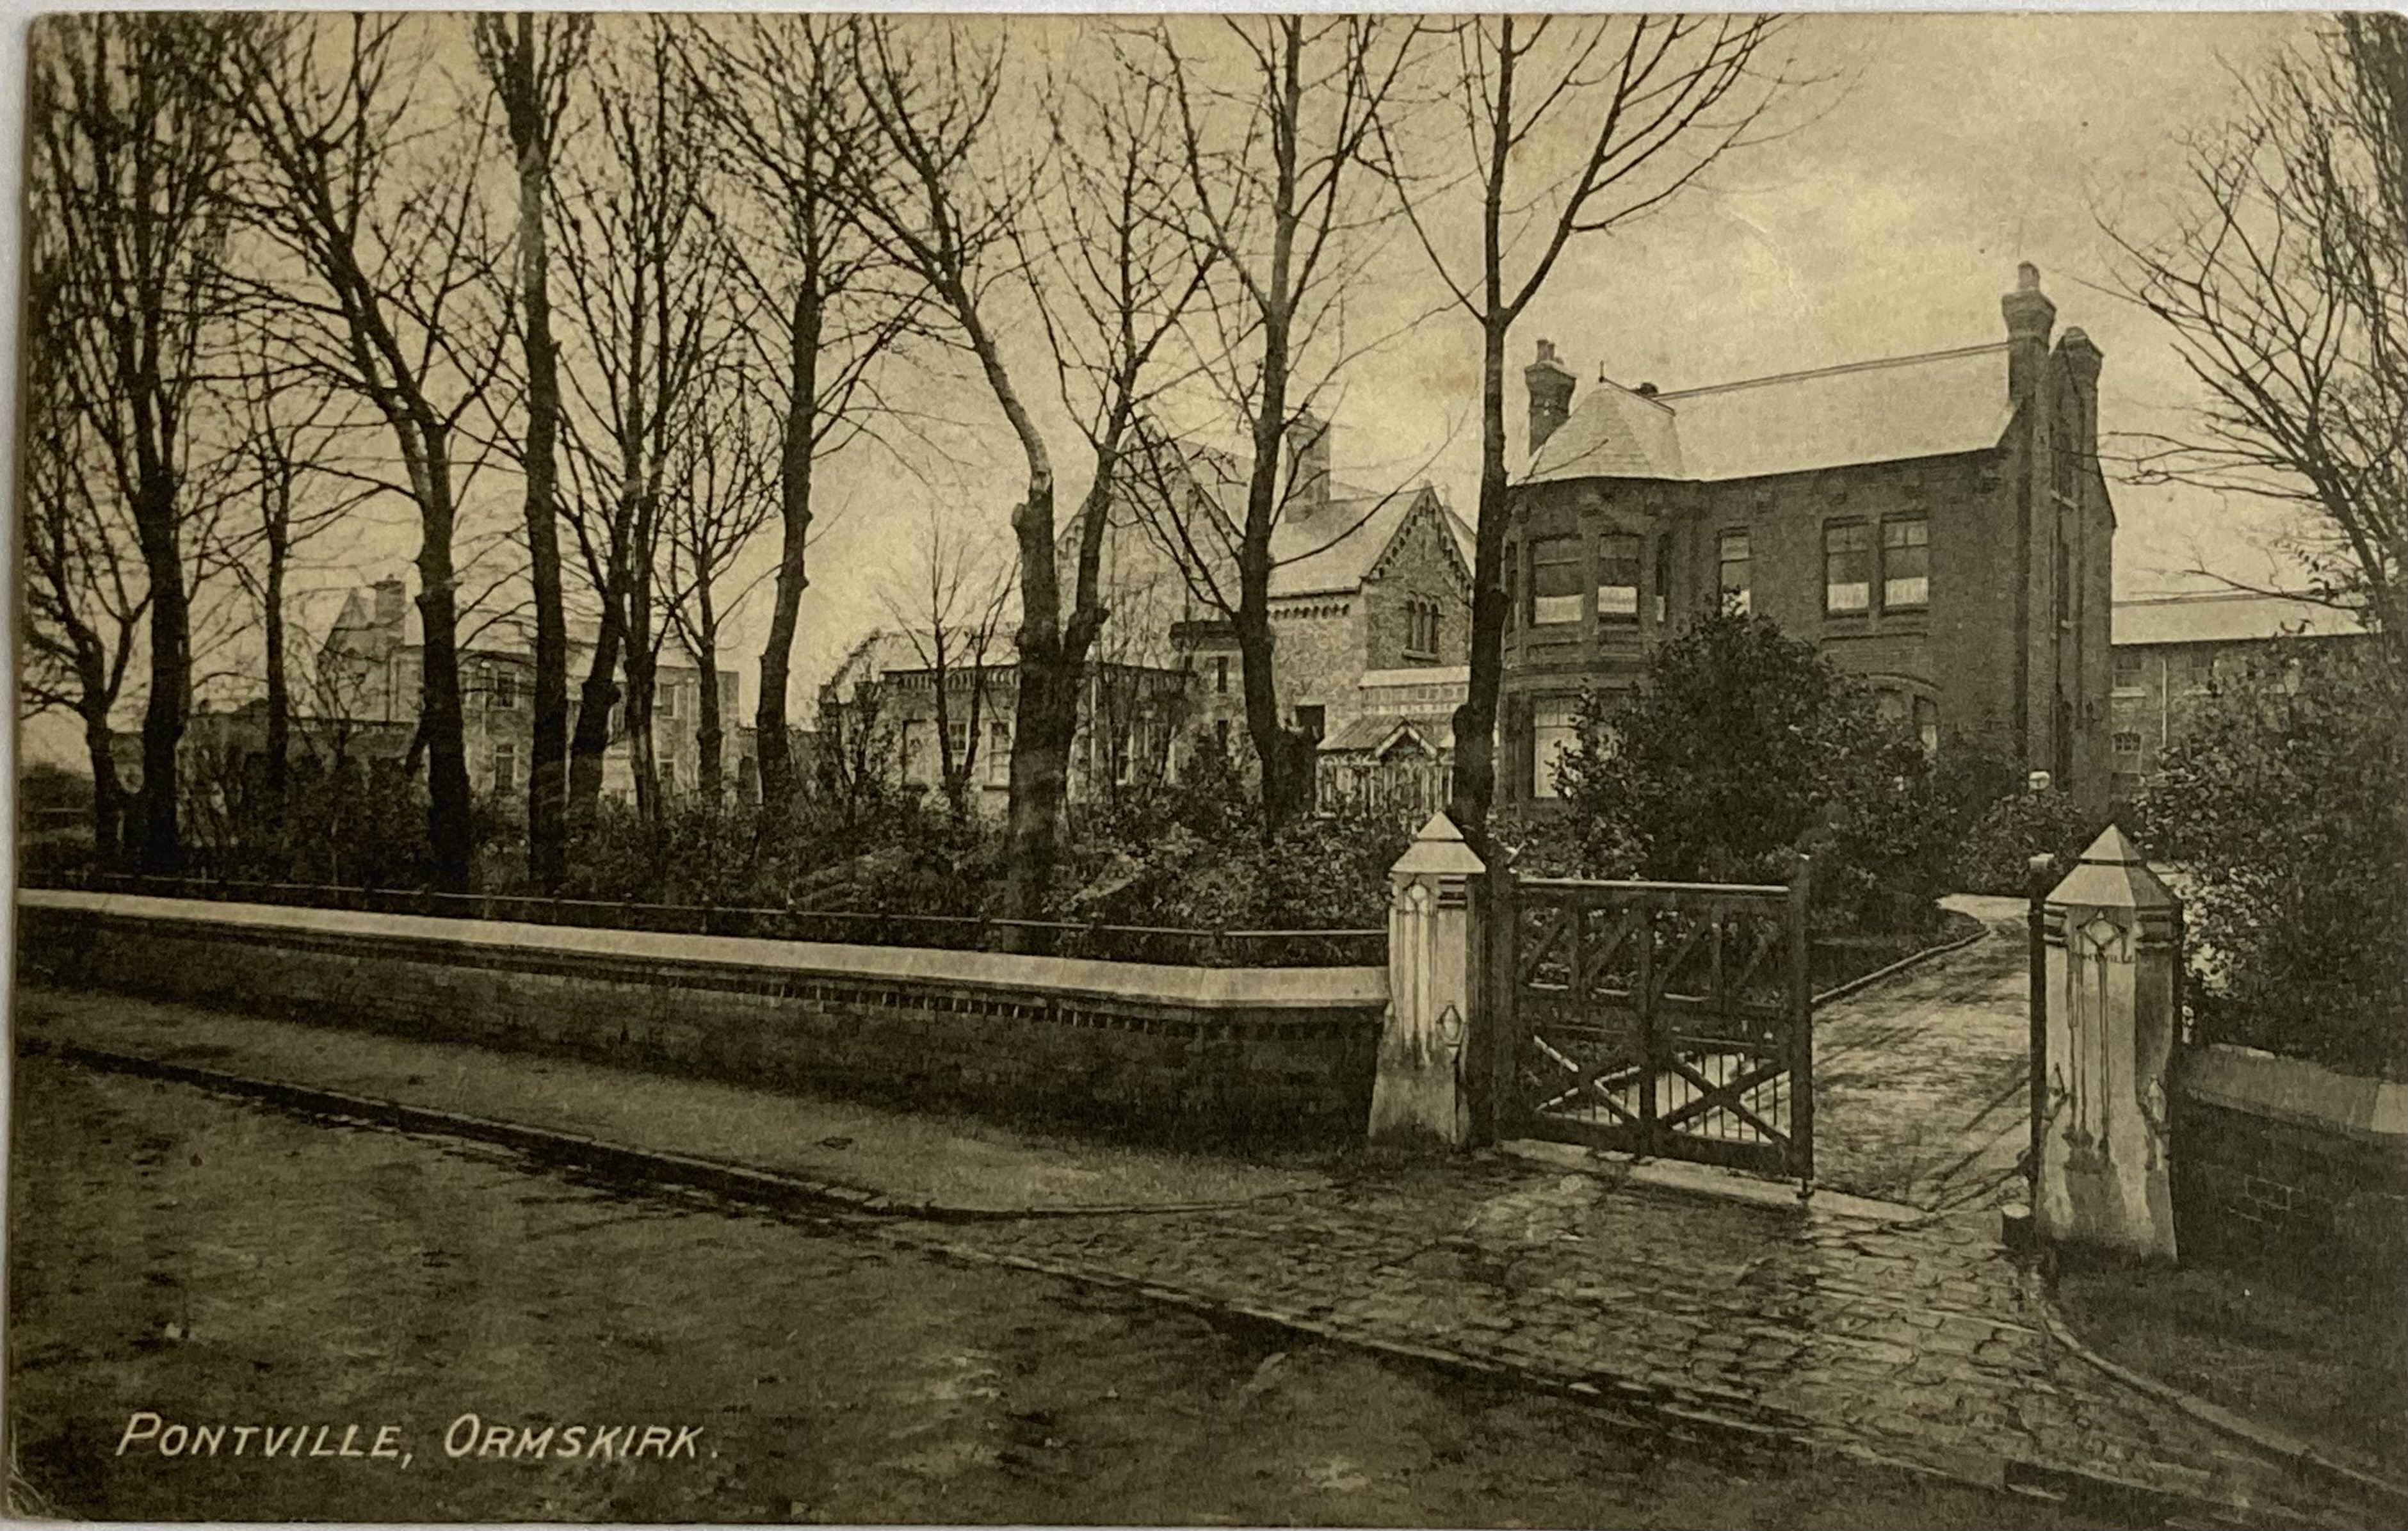 Pontville Ormskirk. Early 20th century